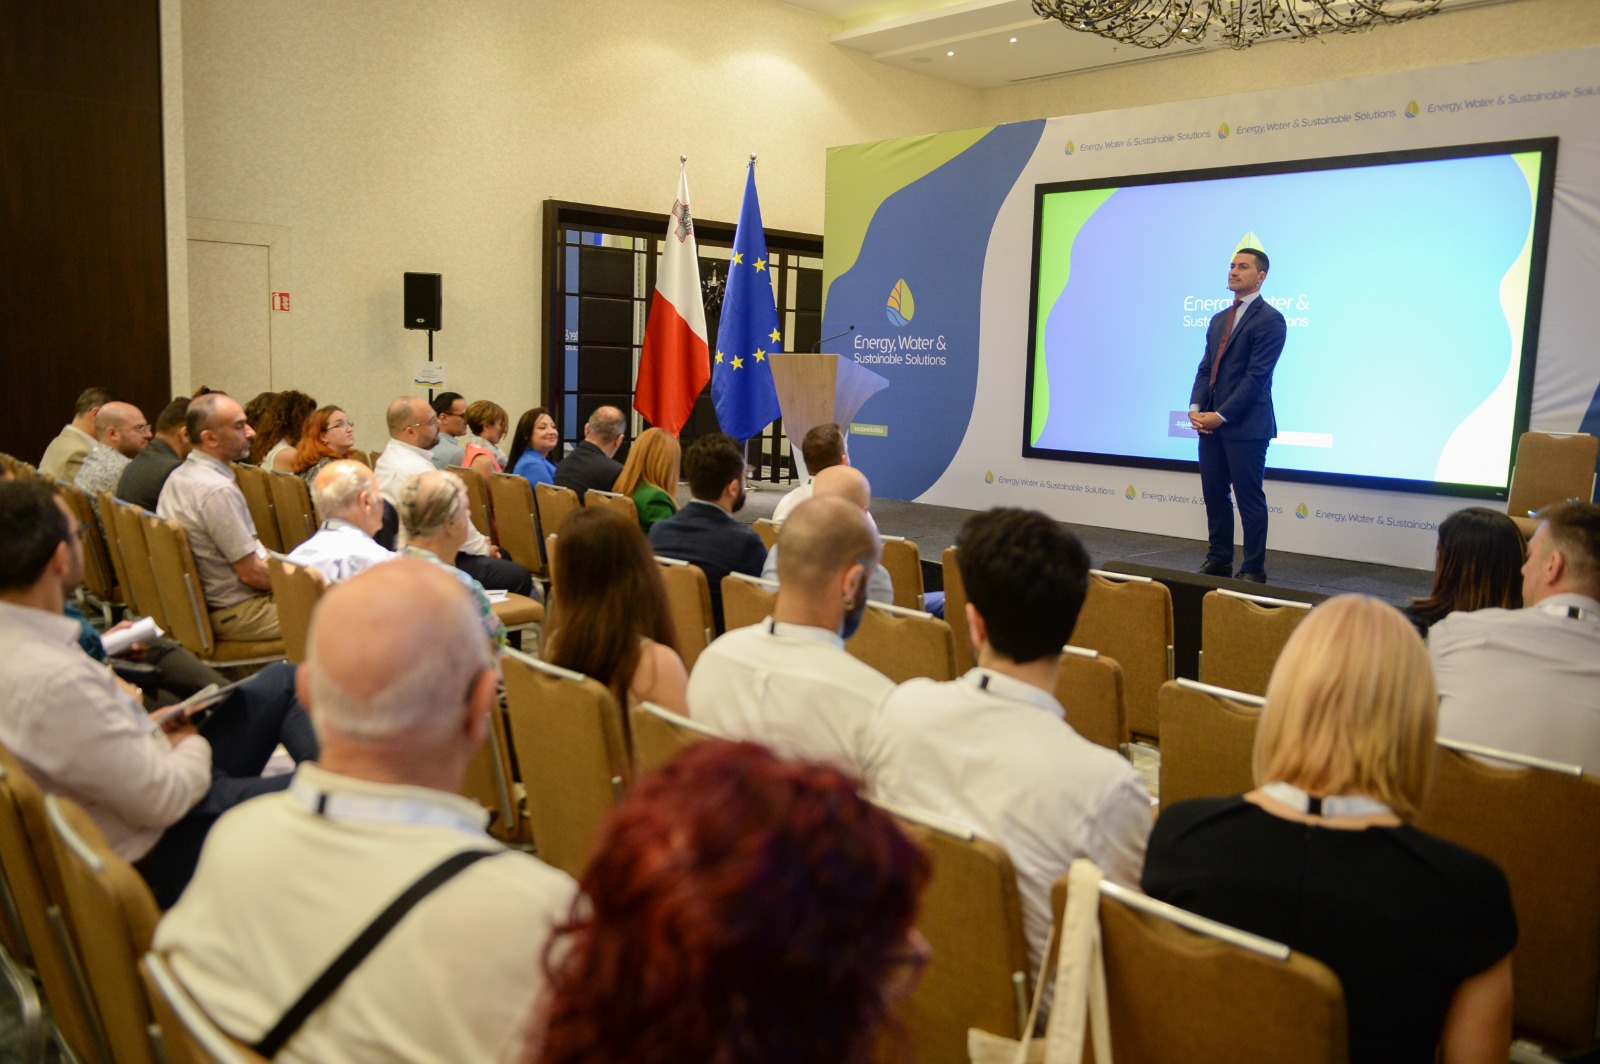 Malta's Sustainability Conference Focuses on Maximizing Energy, Water, and Green Solutions